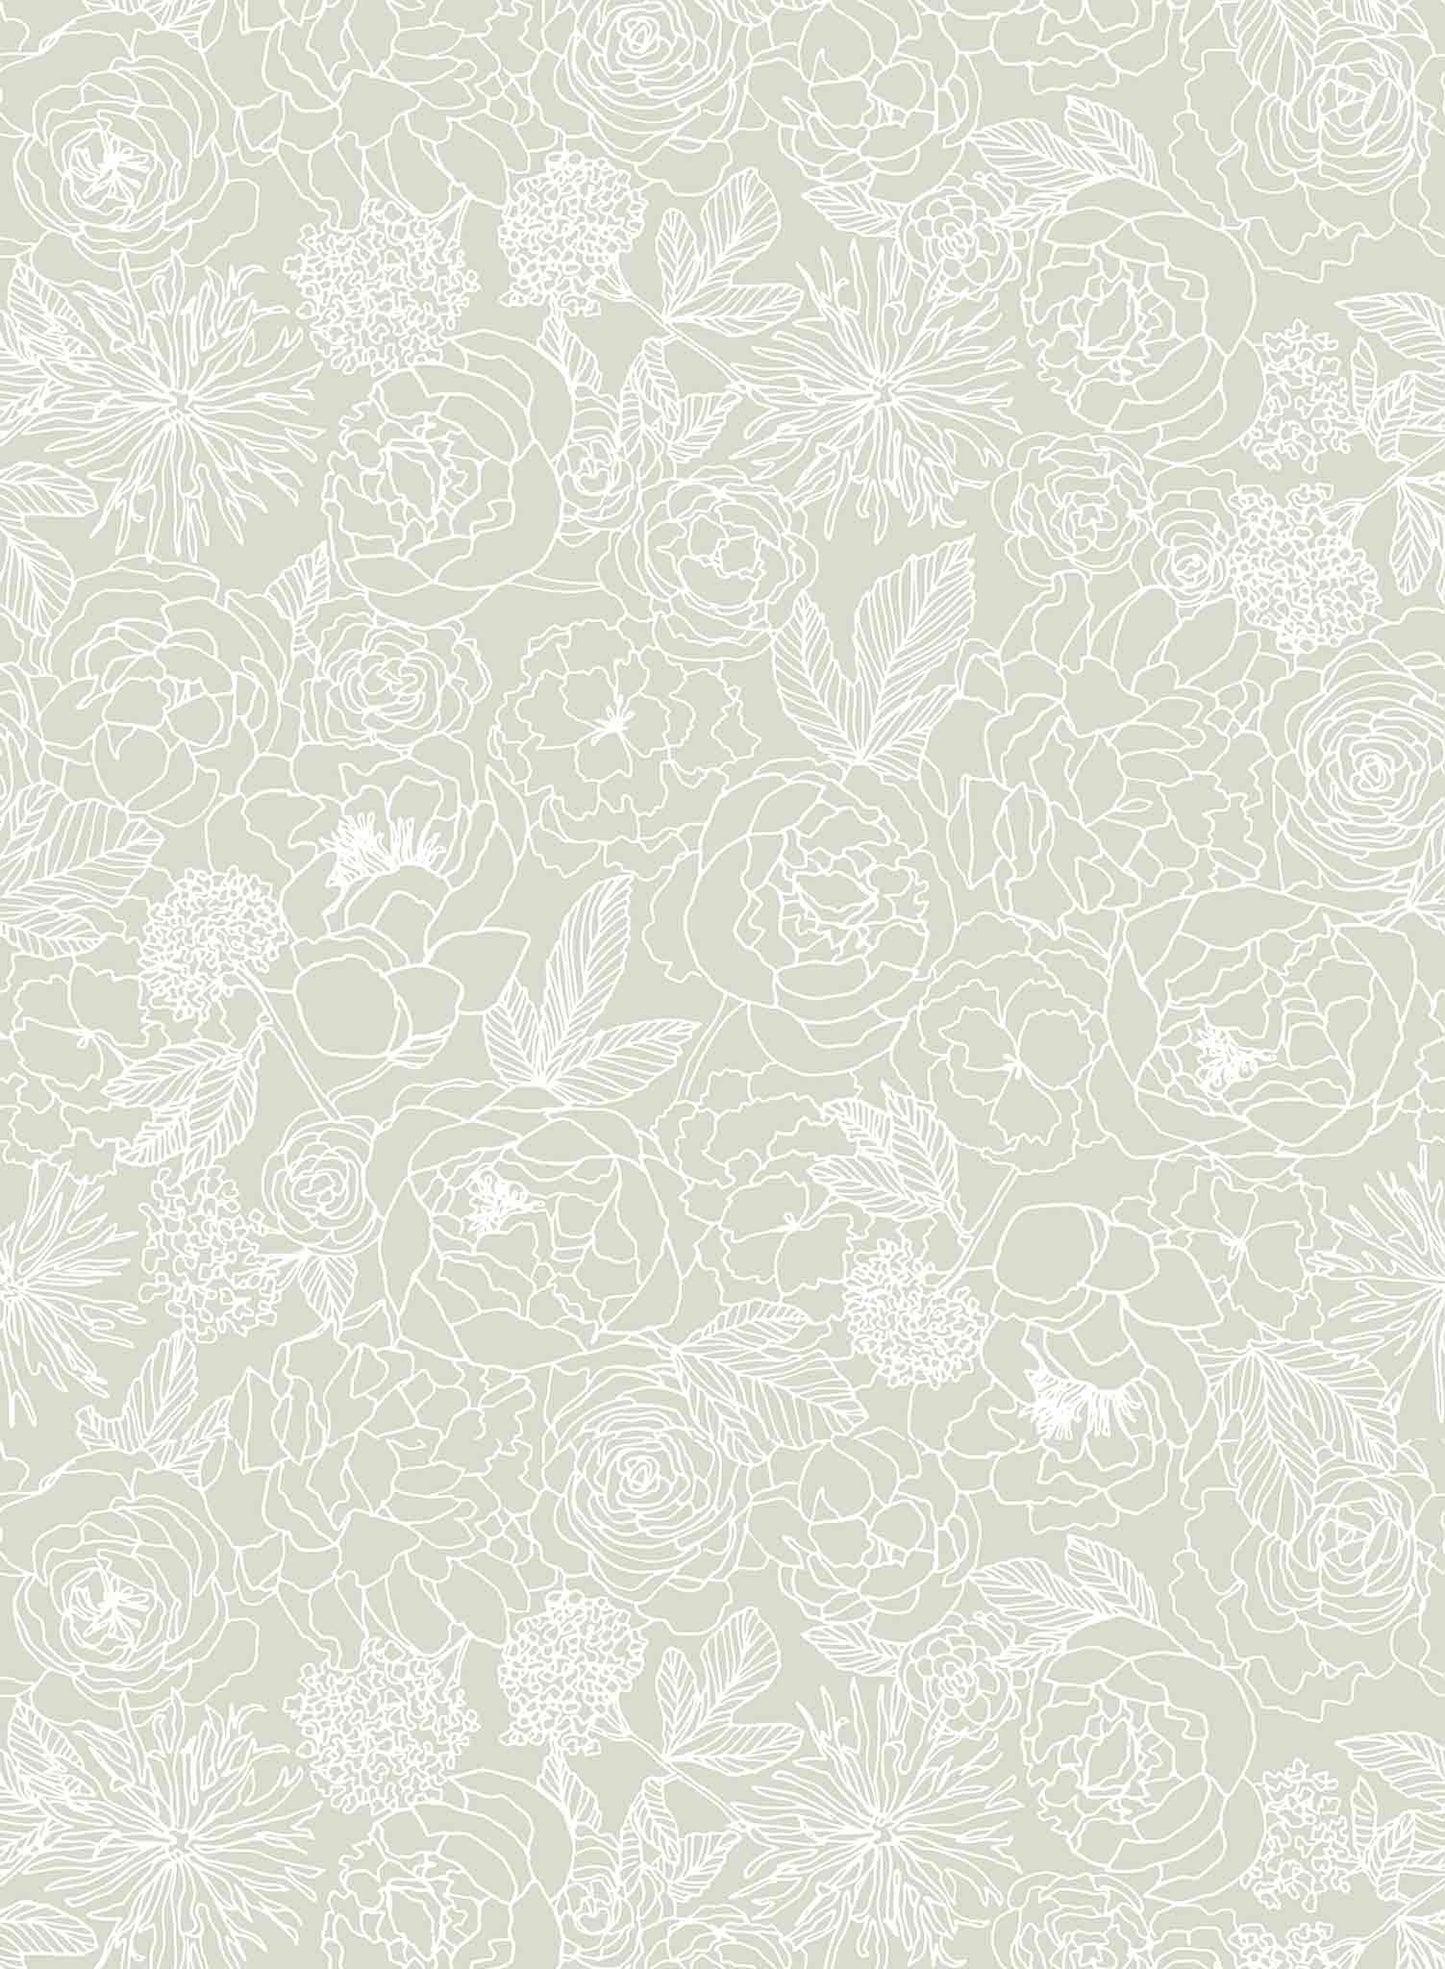 Corsage is a minimalist wallpaper by Opposite Wall of many peony flowers.